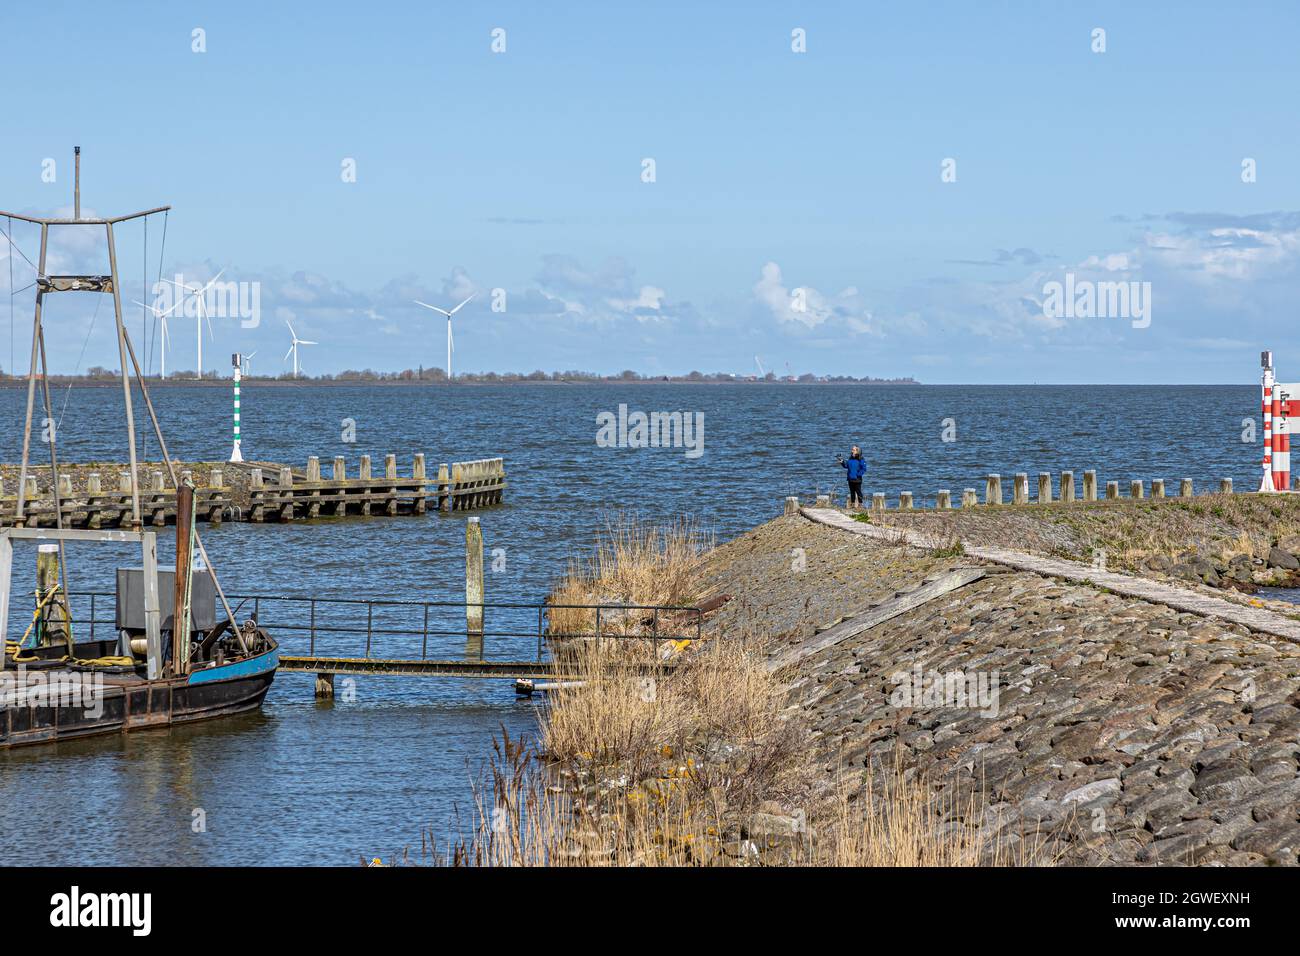 Entrance to Oosterhaven, the city harbor with its dike, floodgates, horizon, windmills and blue sky in the background, tourist woman standing, sunny d Stock Photo